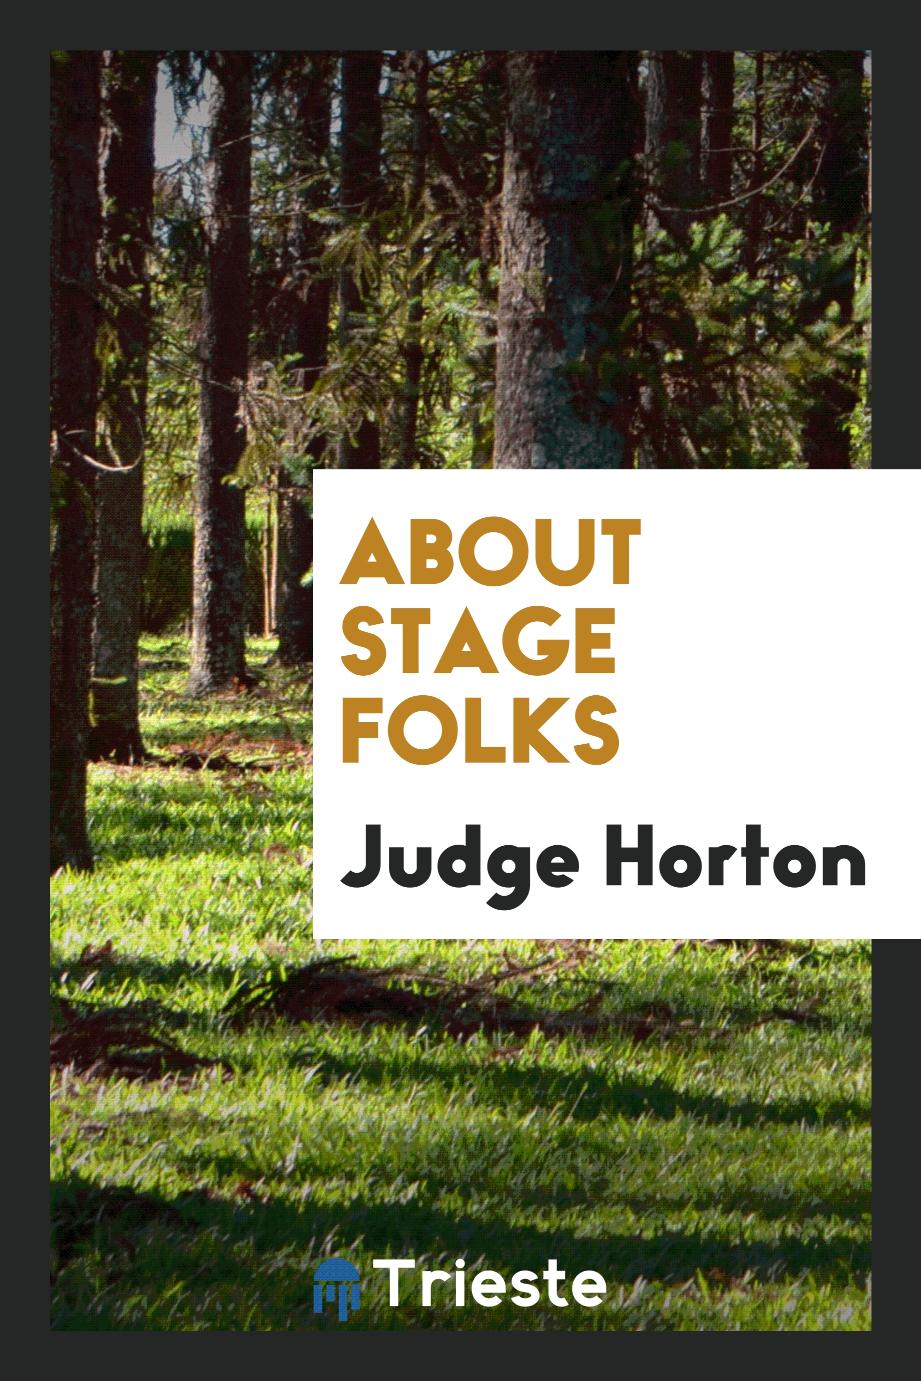 About Stage Folks